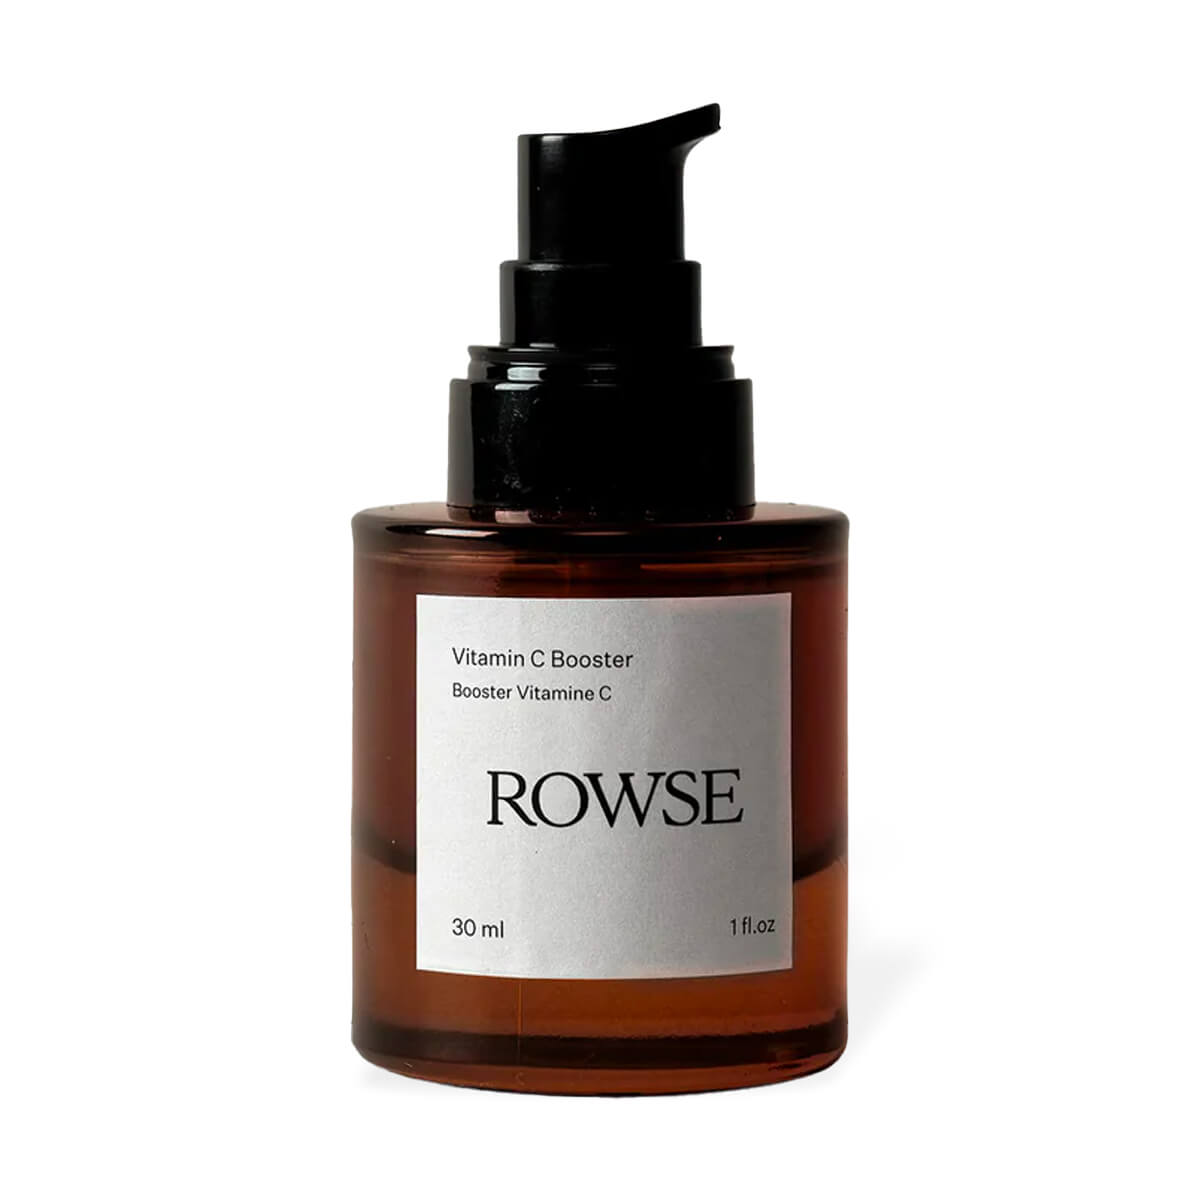 Vitamin C Booster by ROWSE Beauty